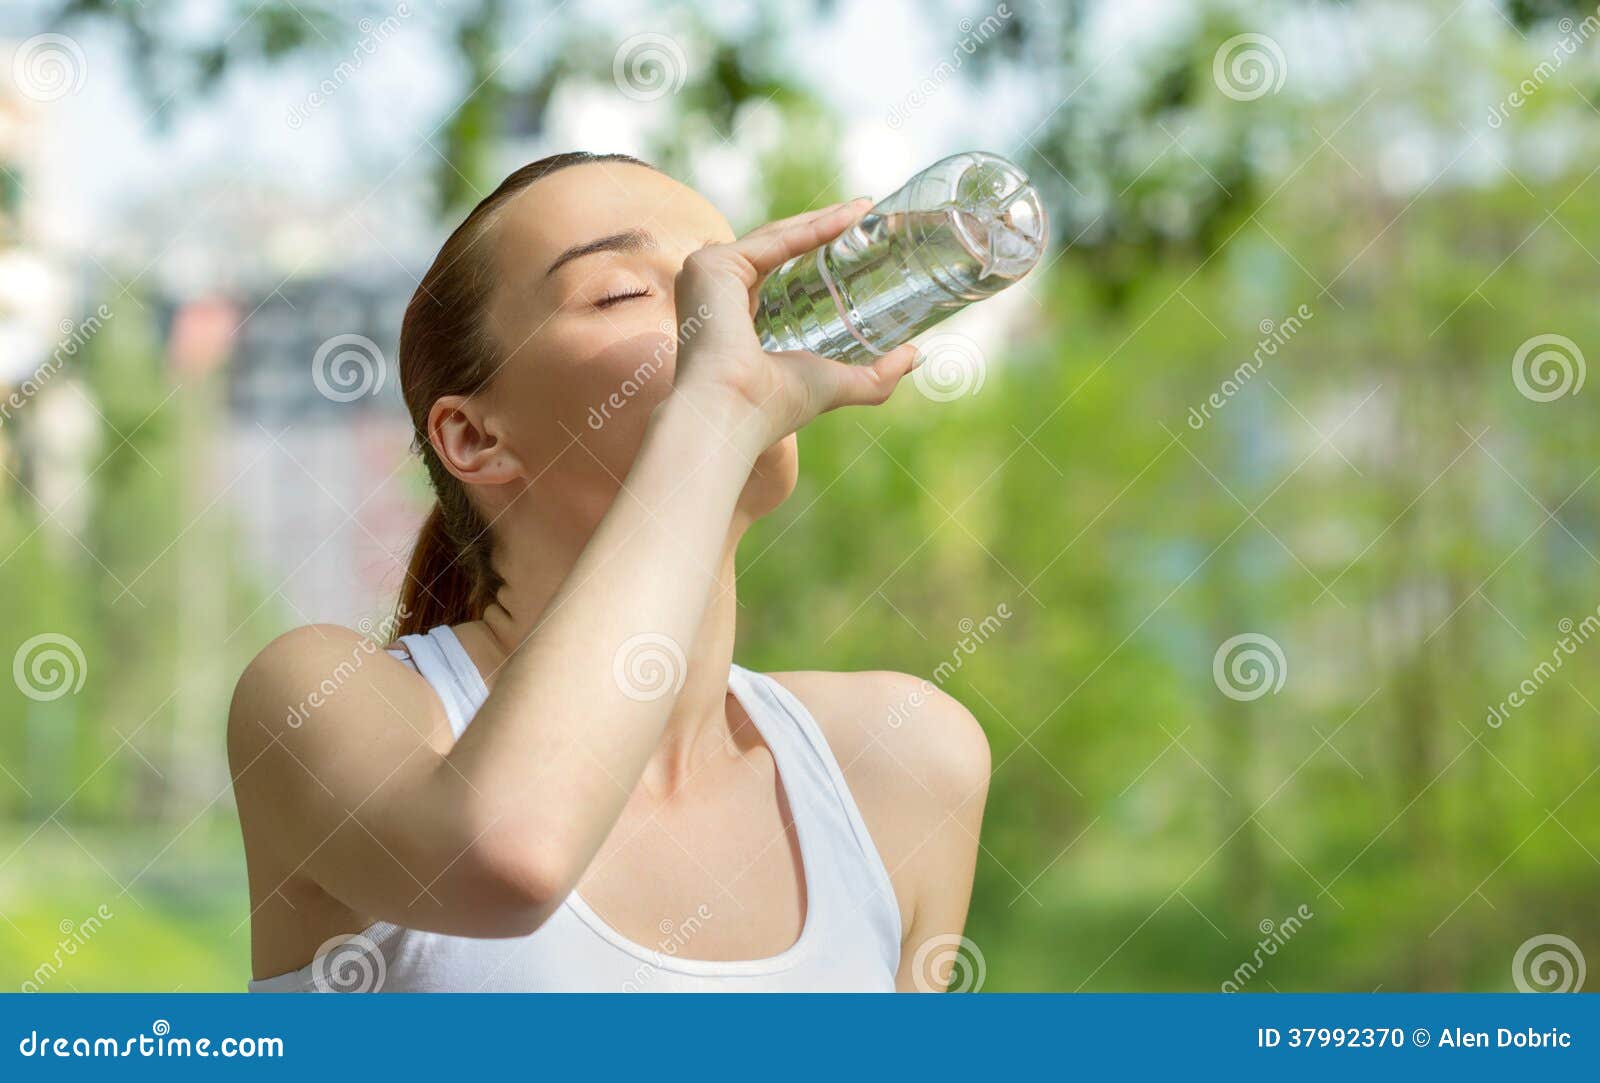 young vitality woman drinking water